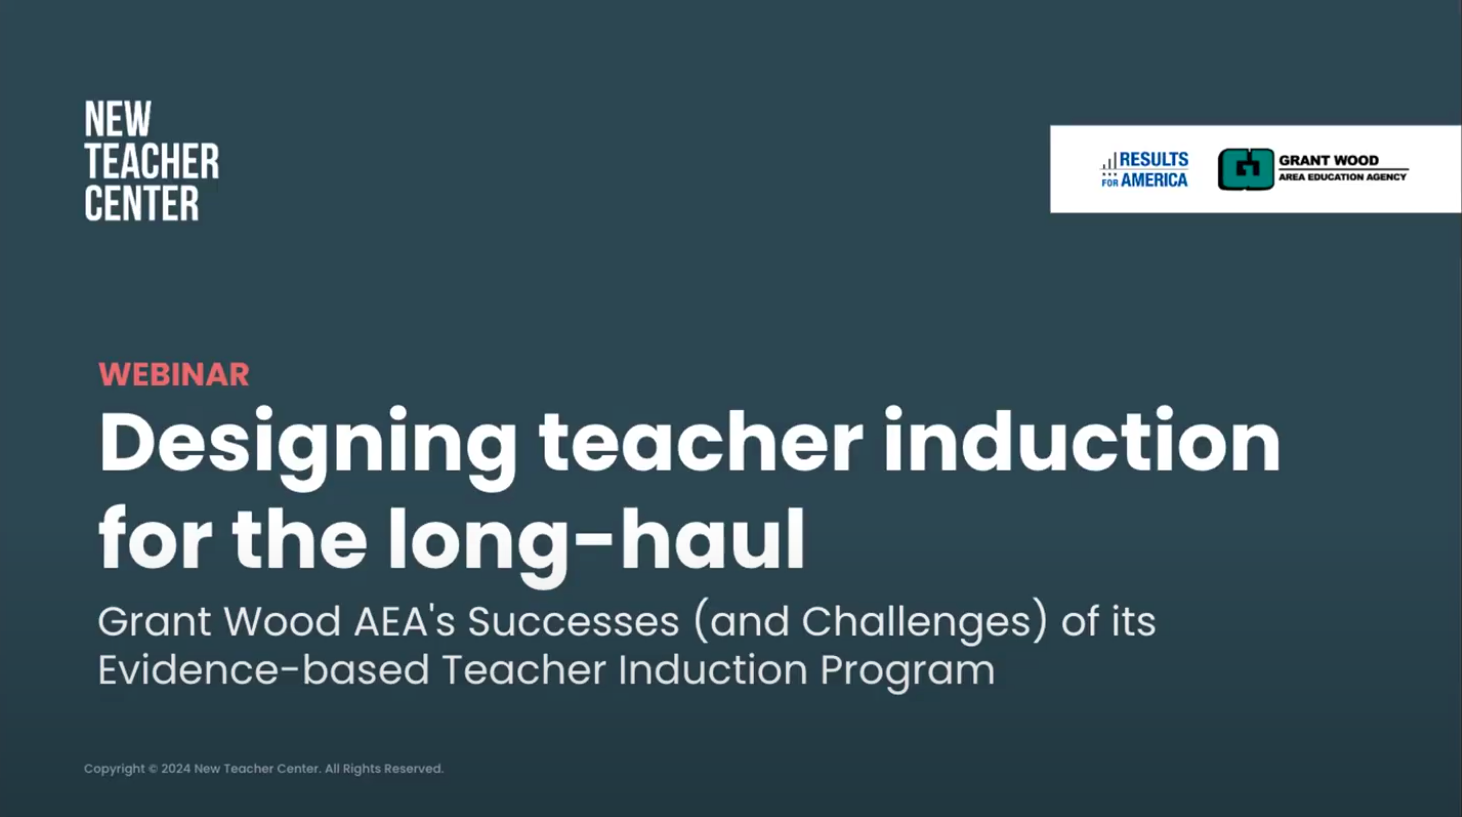 Designing teacher induction for the long-haul